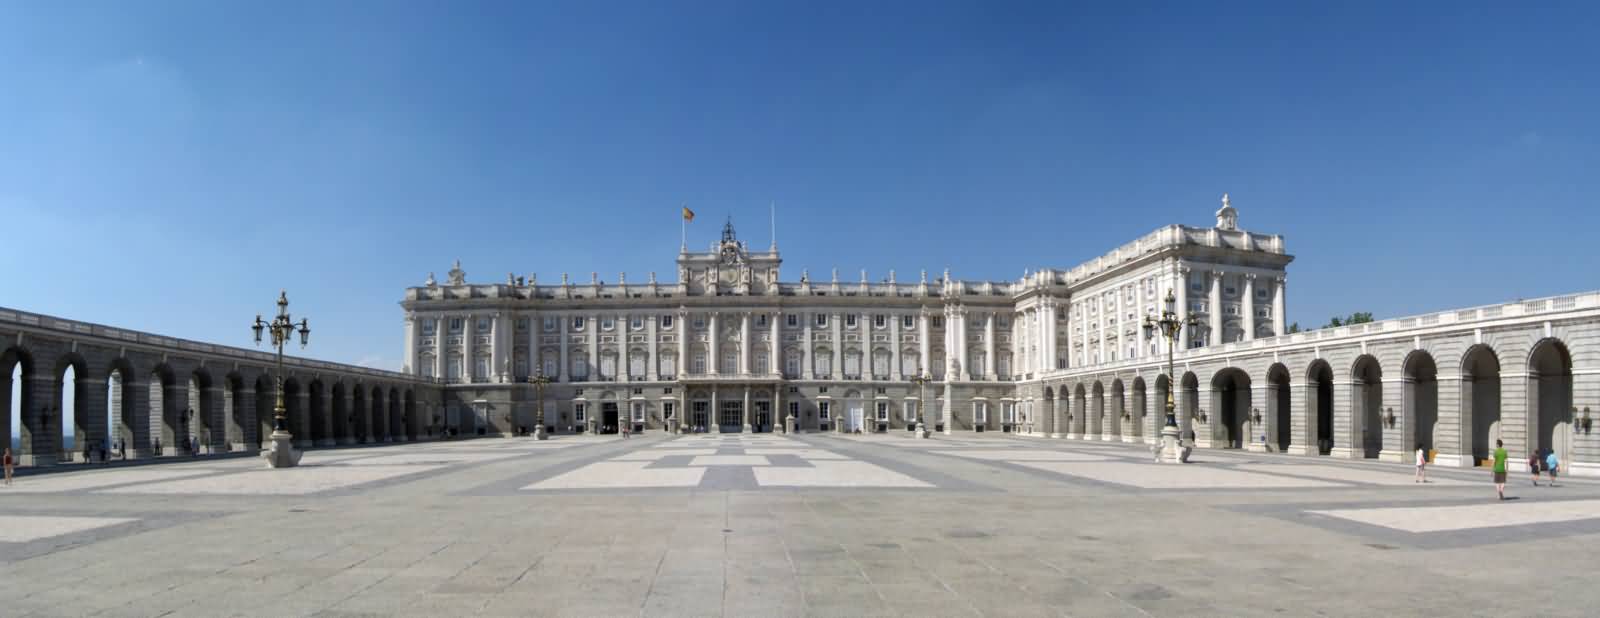 Panorama View Of The Royal Palace Of Madrid Facade